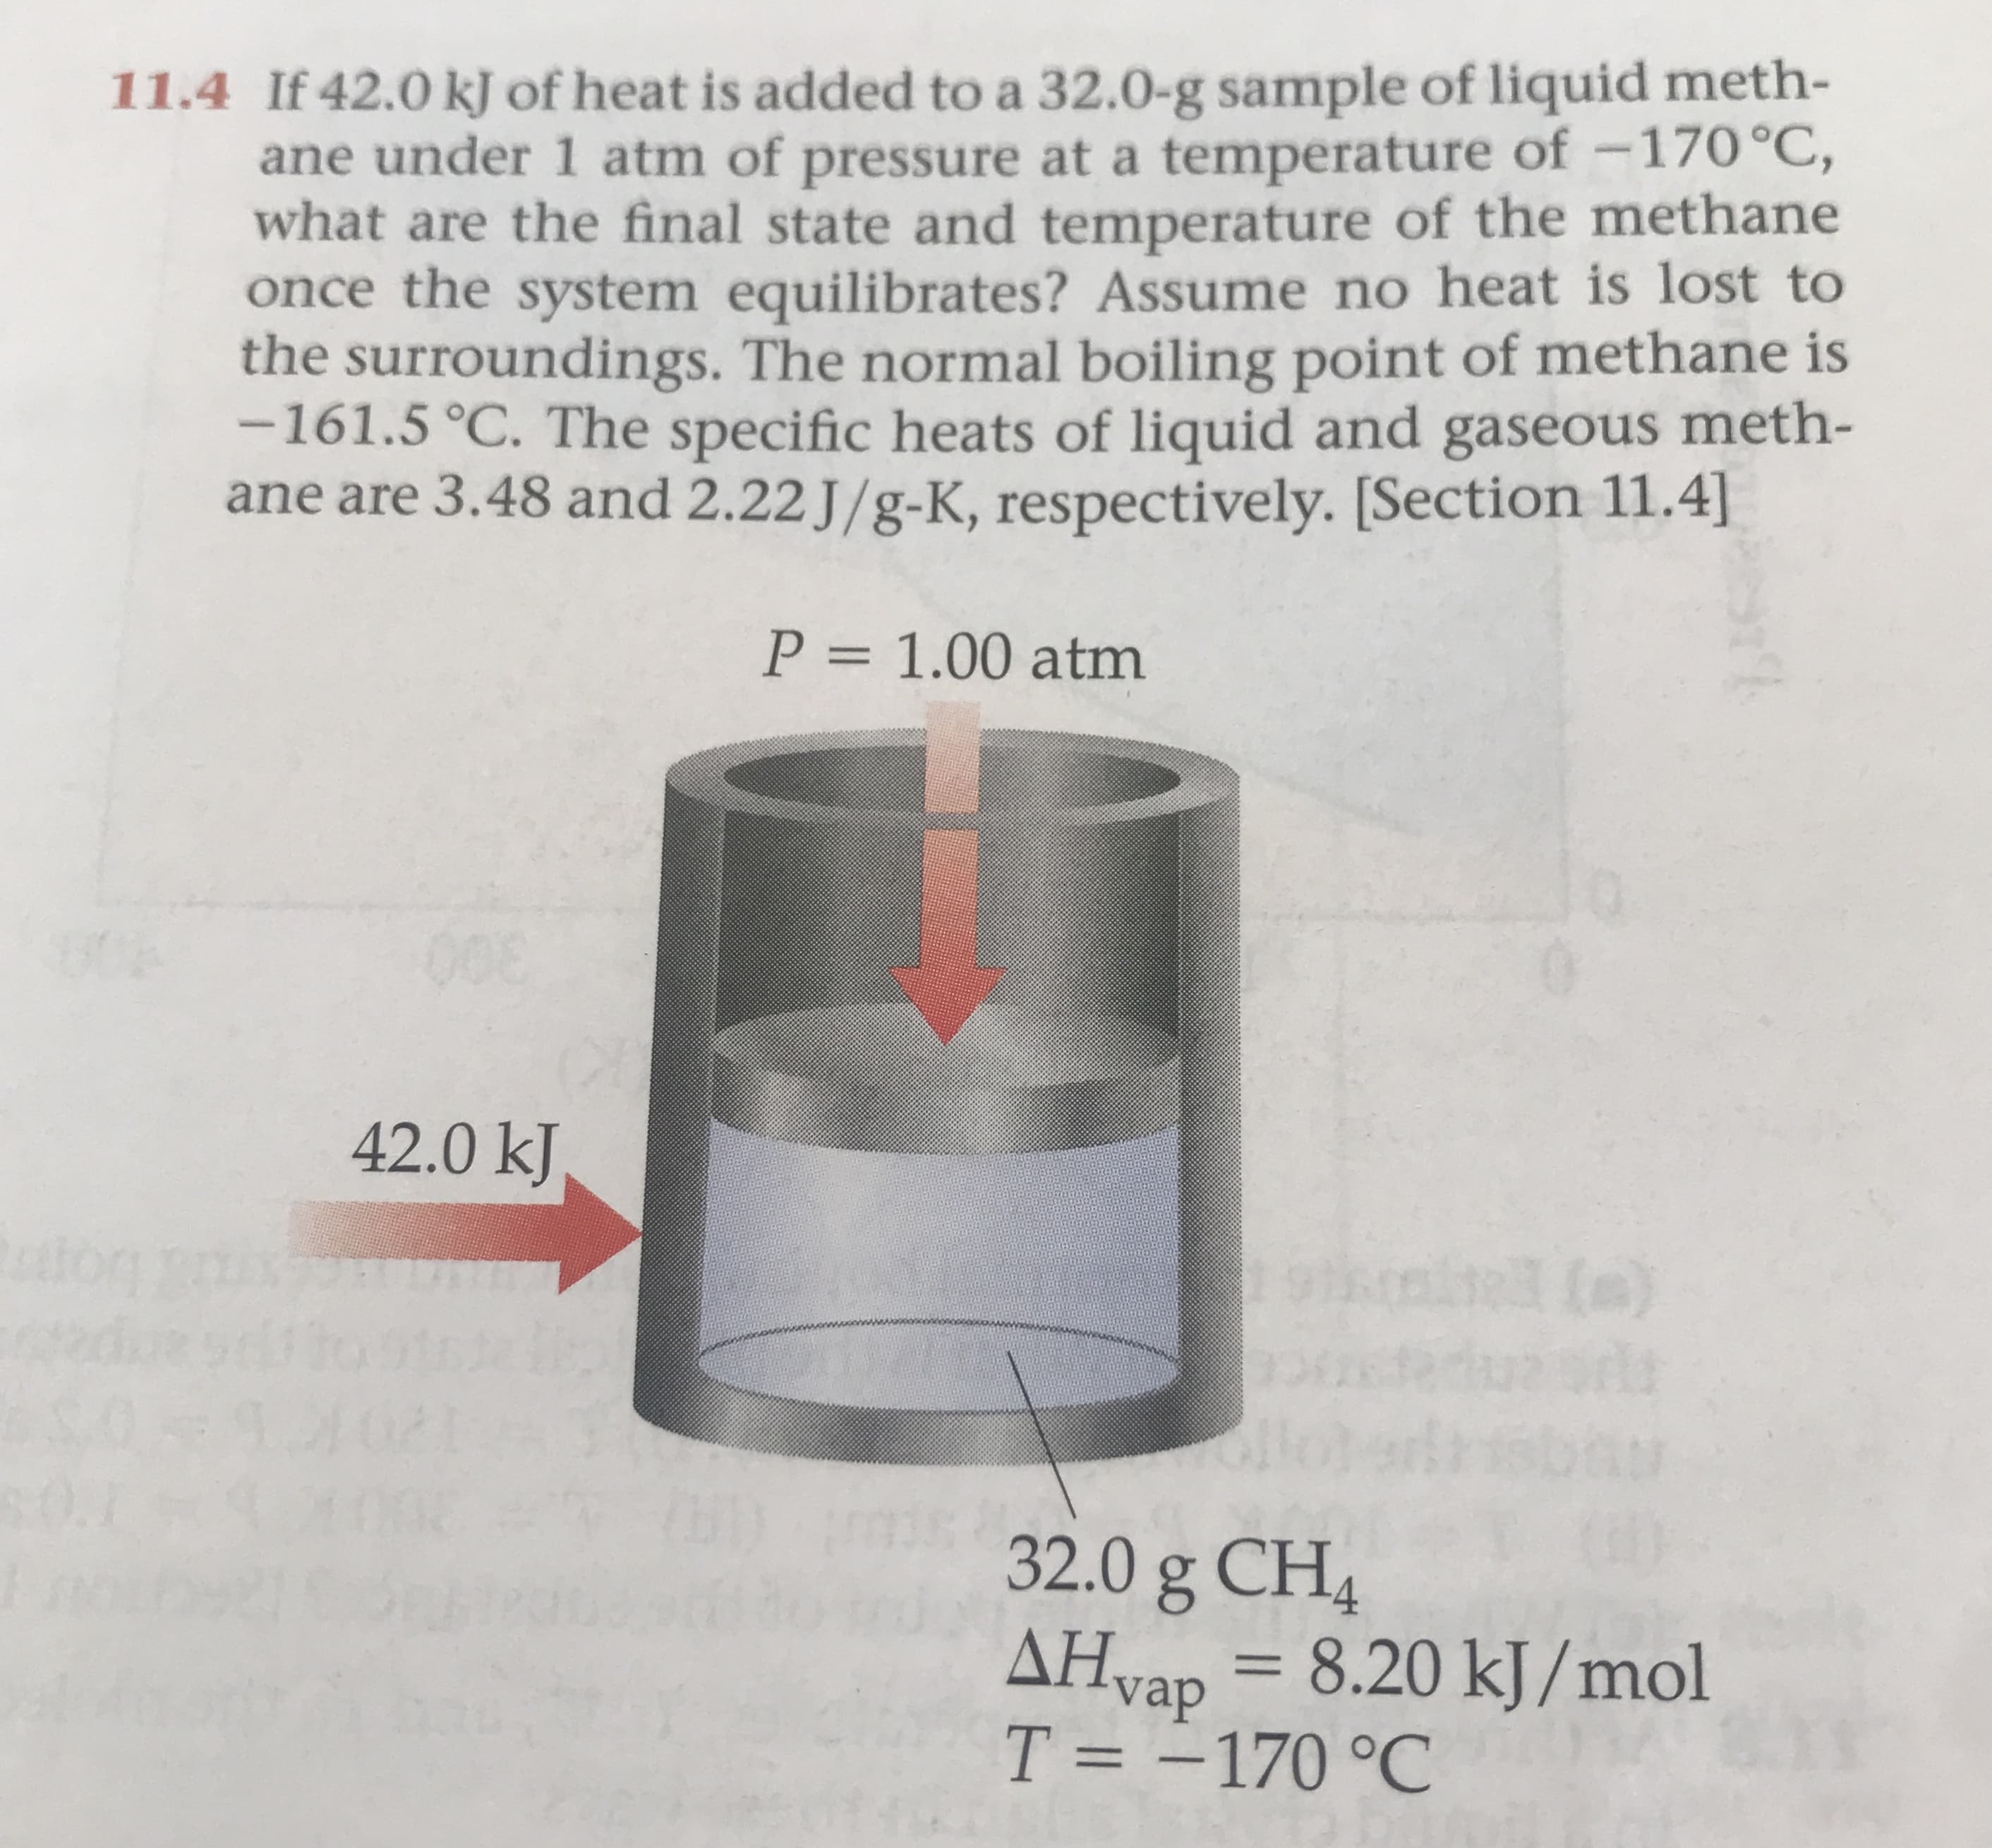 11.4 If 42.0 k of heat is added to a 32.0-g sample of liquid meth-
ane under 1 atm of pressure at a temperature of -170°C,
what are the final state and temperature of the methane
once the system equilibrates? Assume no heat is lost to
the surroundings. The normal boiling point of methane is
-161.5 °C. The specific heats of liquid and gaseous meth-
ane are 3.48 and 2.22 J/g-K, respectively. [Section 11.4]
P = 1.00 atm
008
42.0 kJ
tetR
3
()
2
32.0 g CH4
AHvap 8.20 kJ/mol
T = -170 °C
11
